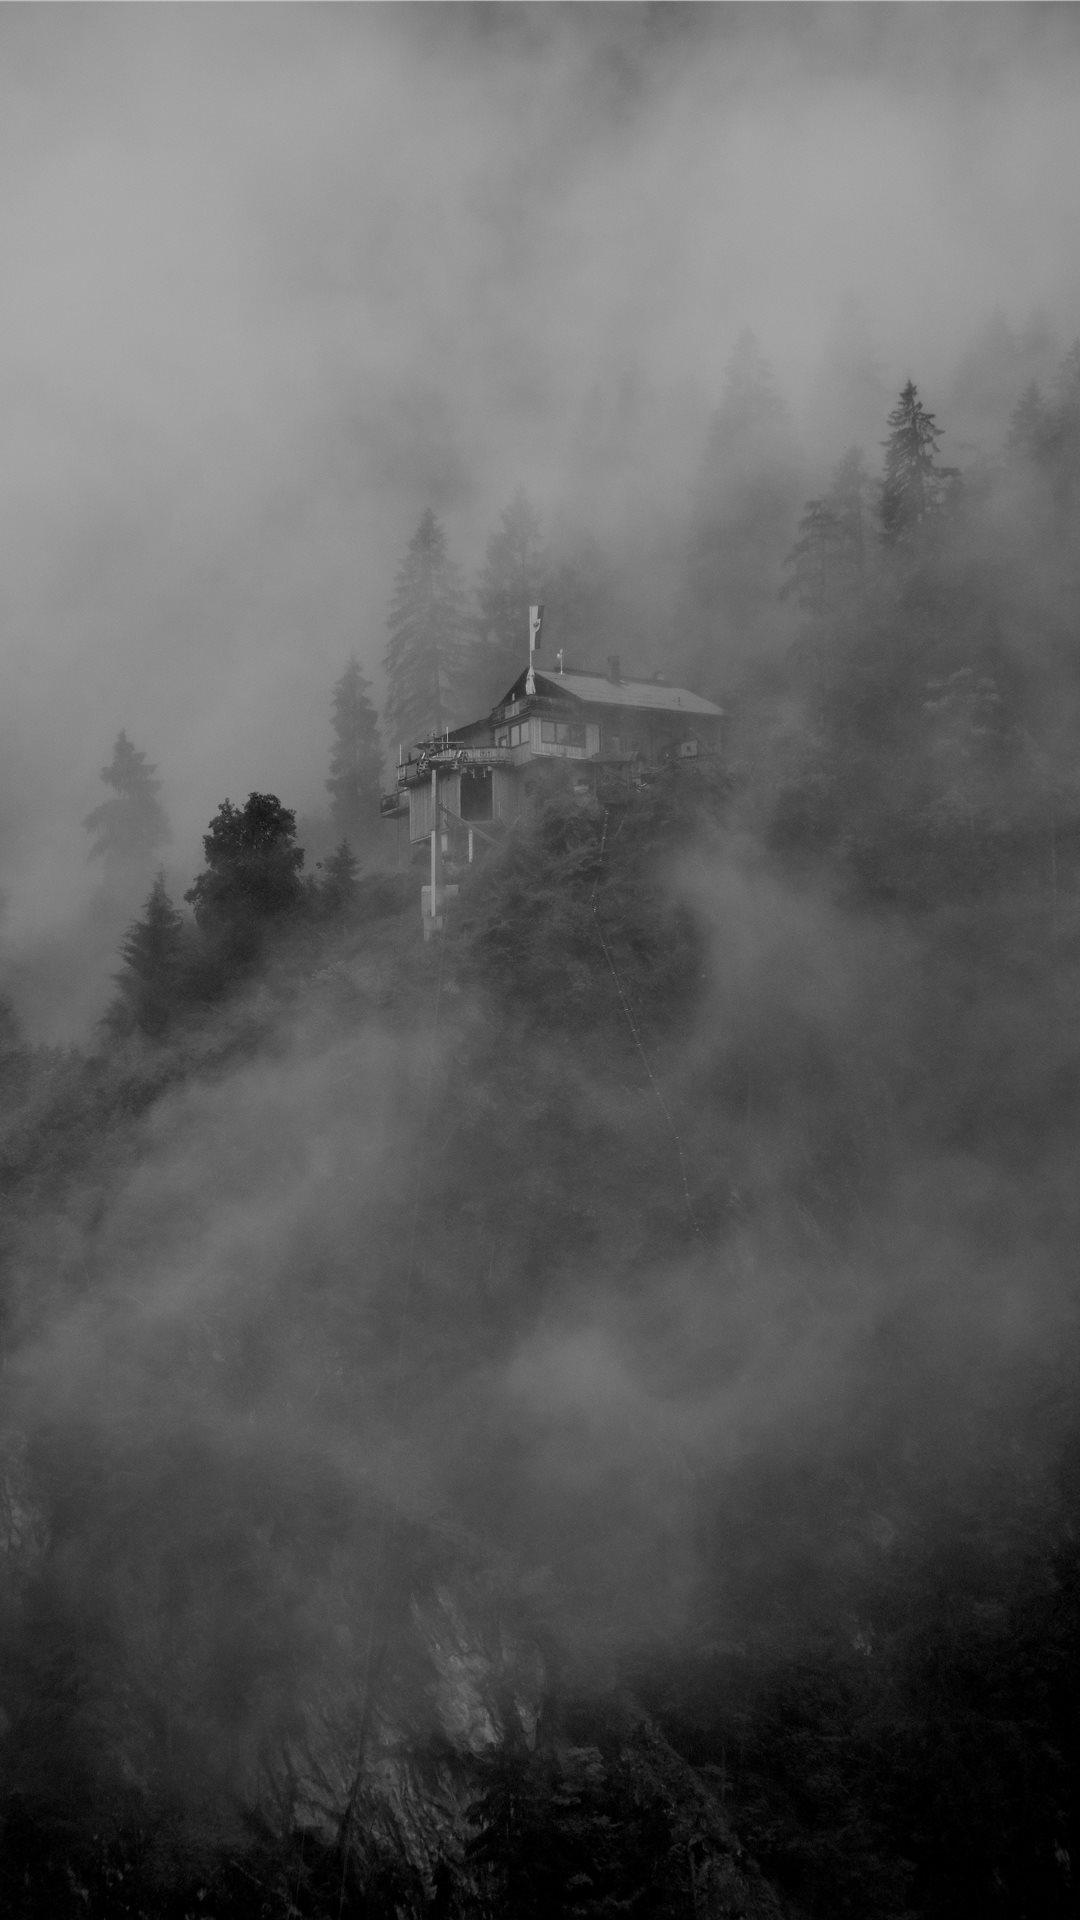 The fog of mystery iPhone X Wallpaper Download. iPhone Wallpaper